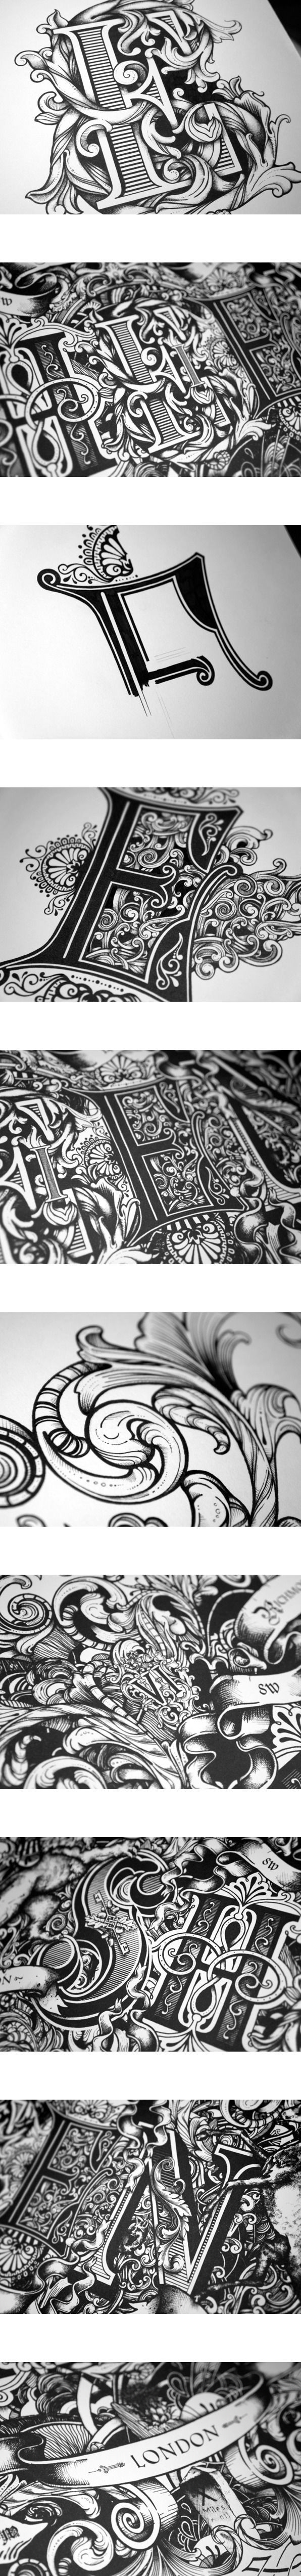 Sheen by Greg Coulton, via Behance #calligraphy #t...